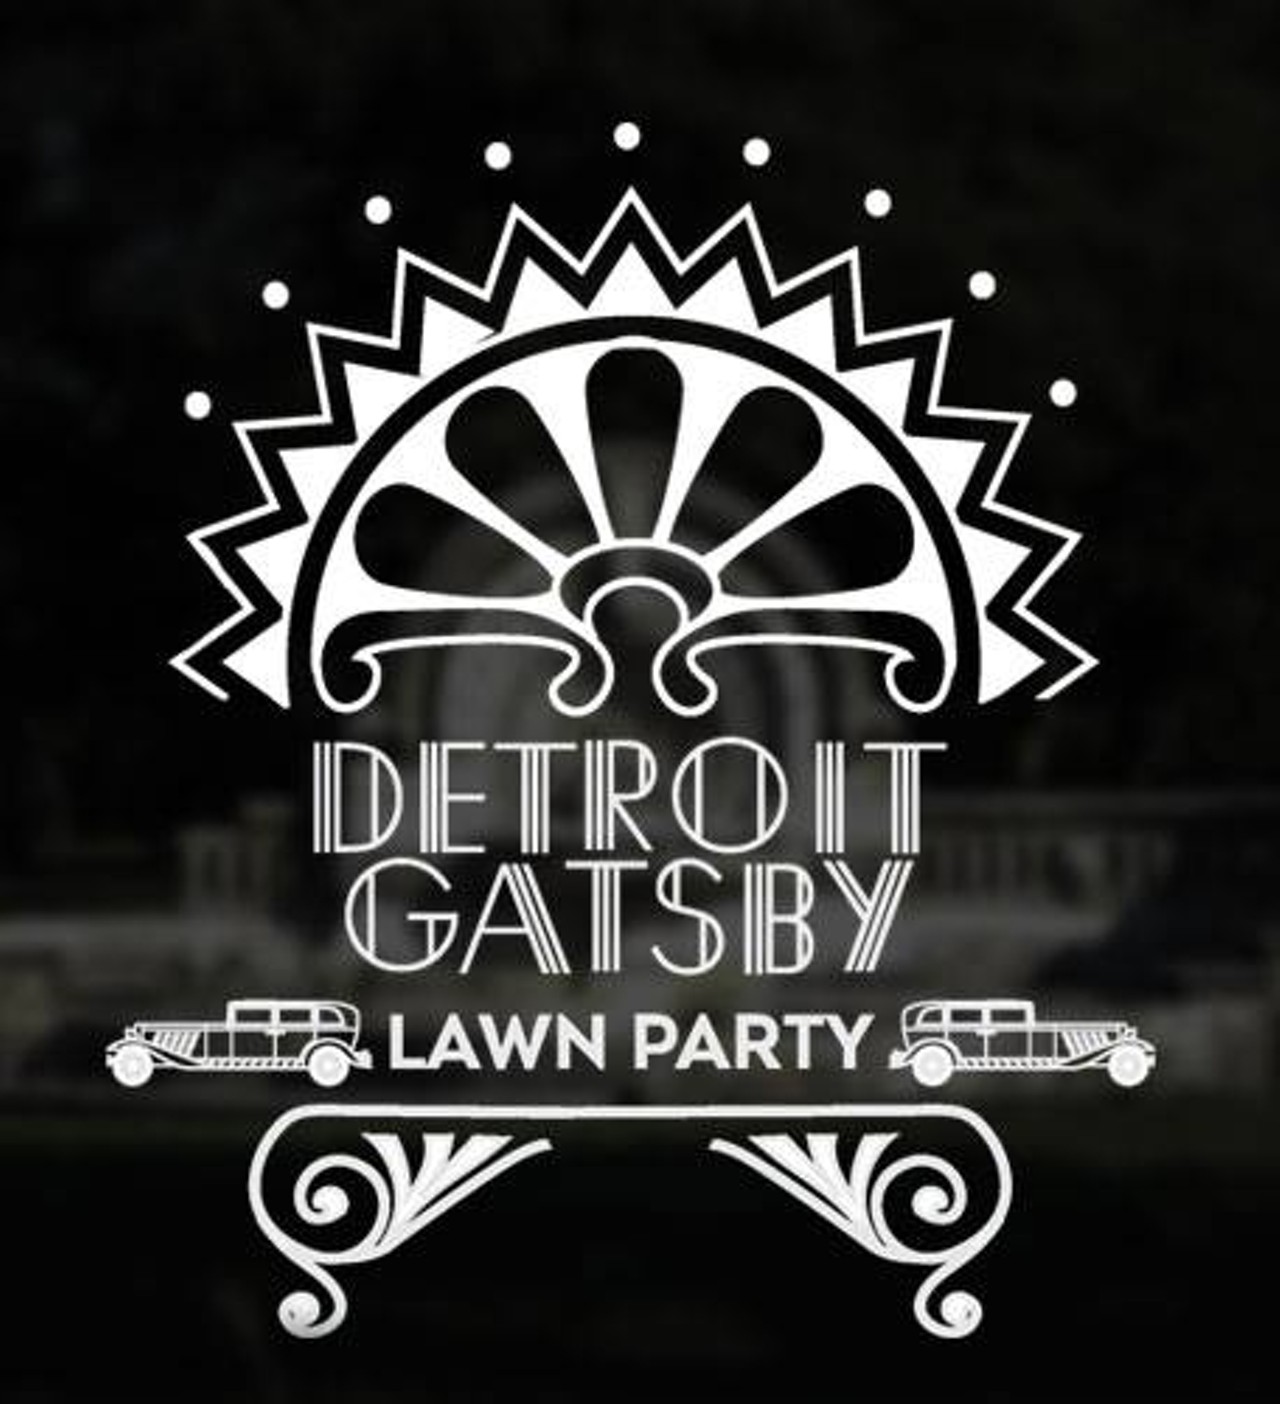 Sunday, 9/11
Detroit Gatsby
Lawn Party
@ Palmer Park
Relive the height of Detroit&#146;s cultural decadence at the second annual Detroit Gatsby Lawn Party, a themed event that recreates the unique character of 1920s to 1930s Detroit with Jazz Age music, motorcars, entertainment, activities, and living history for all to enjoy. Channel your inner Jay Gatsby with spectator shoes and a linen suit, or your inner Daisy Buchanan with a drop-waist dress and a long strand of costume pearls to fully complete the step back in time.
Runs from noon to 5 p.m.; 19013 Woodward Ave., Detroit; detroitgatsbylawnparty.com; 415-666-5735; tickets are $24-$150.